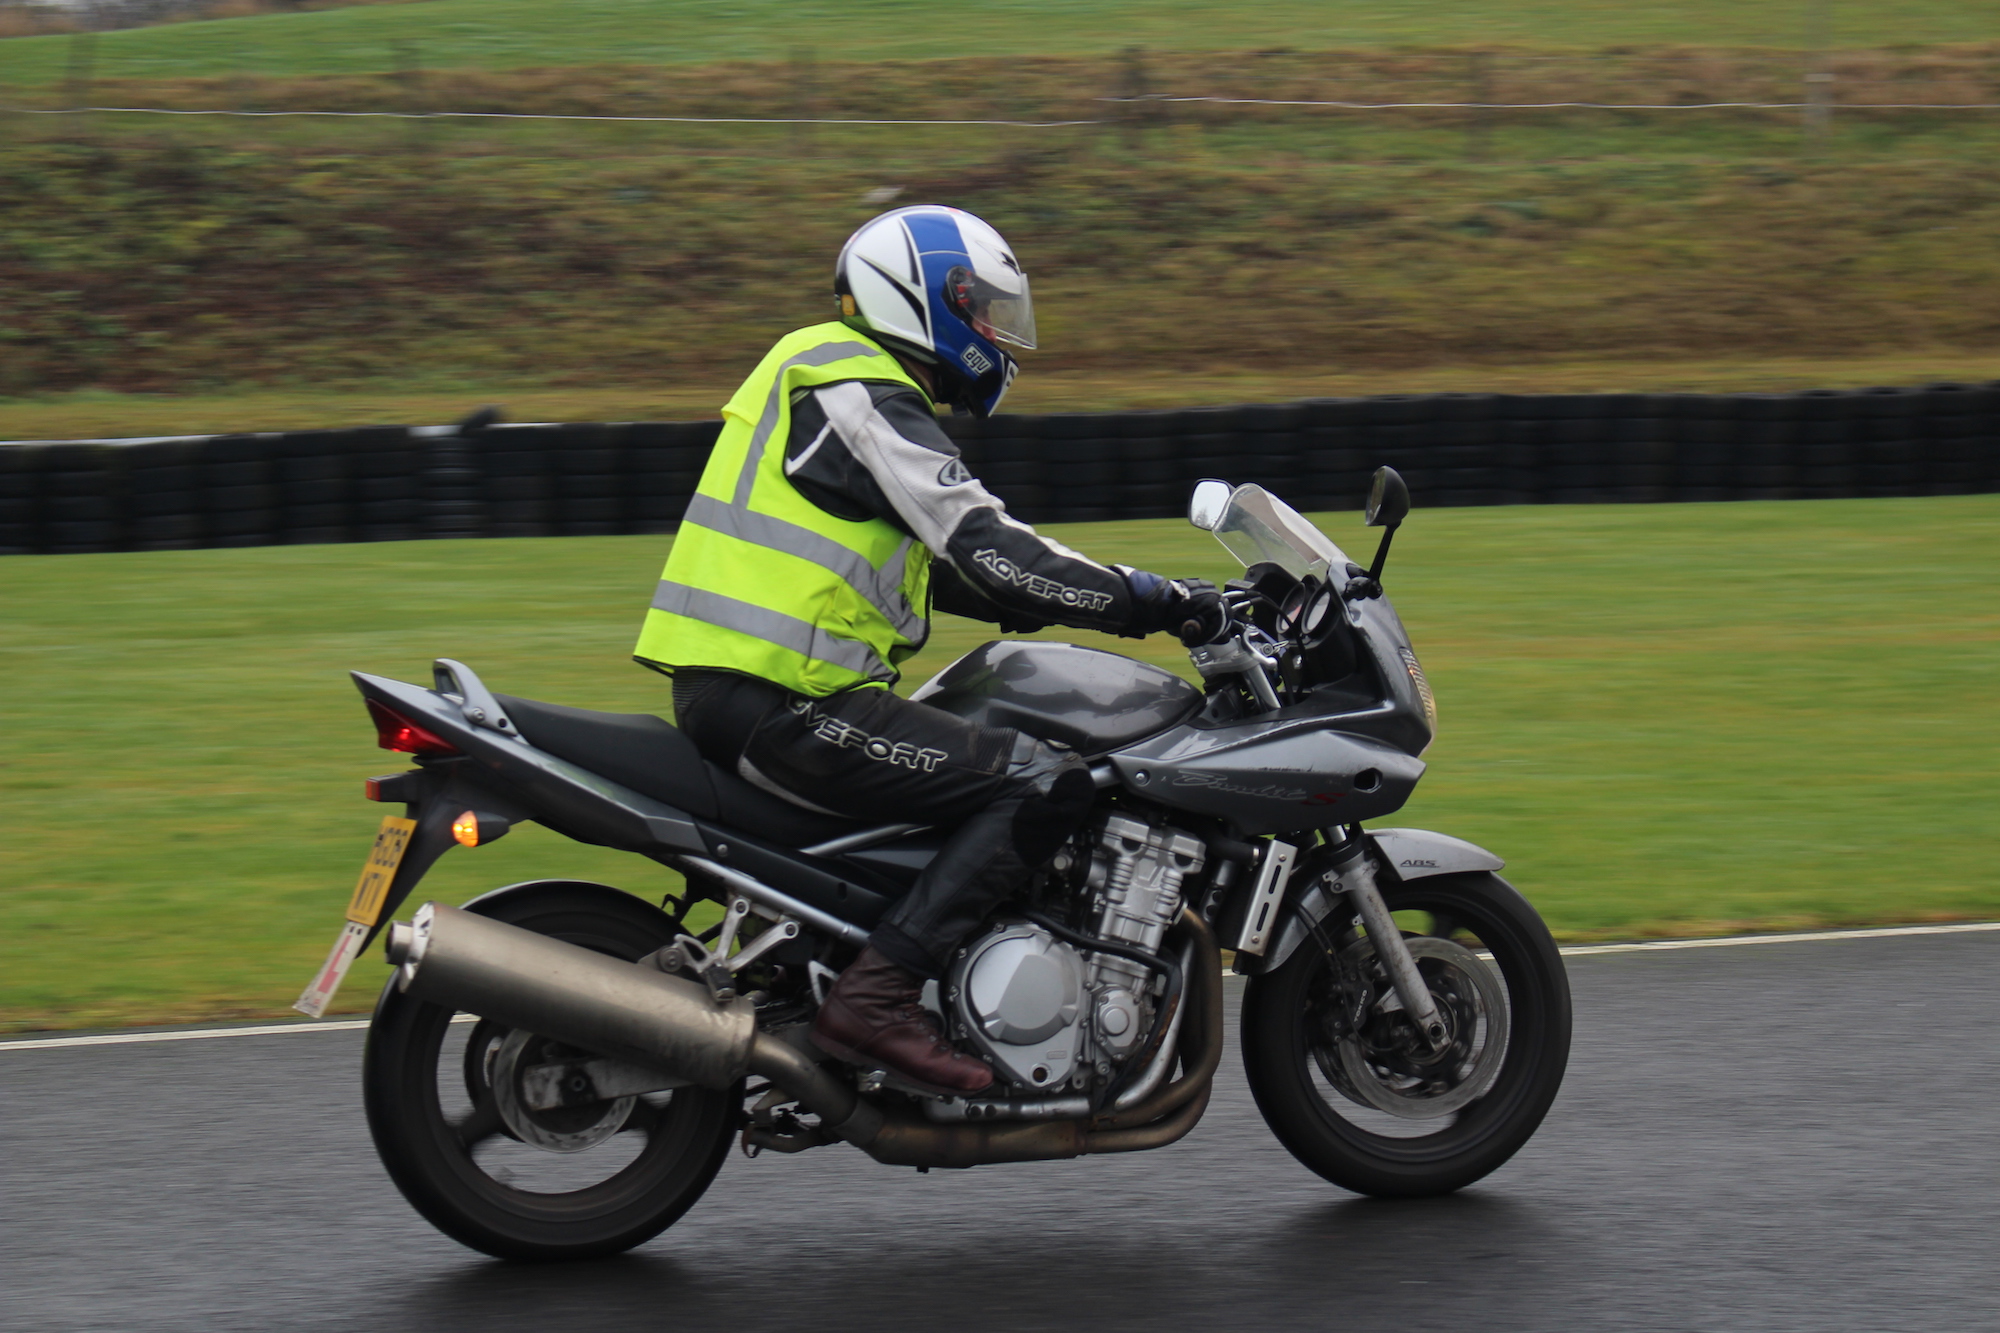 Motorcycle training in Leicester, Nottingham, Loughborough